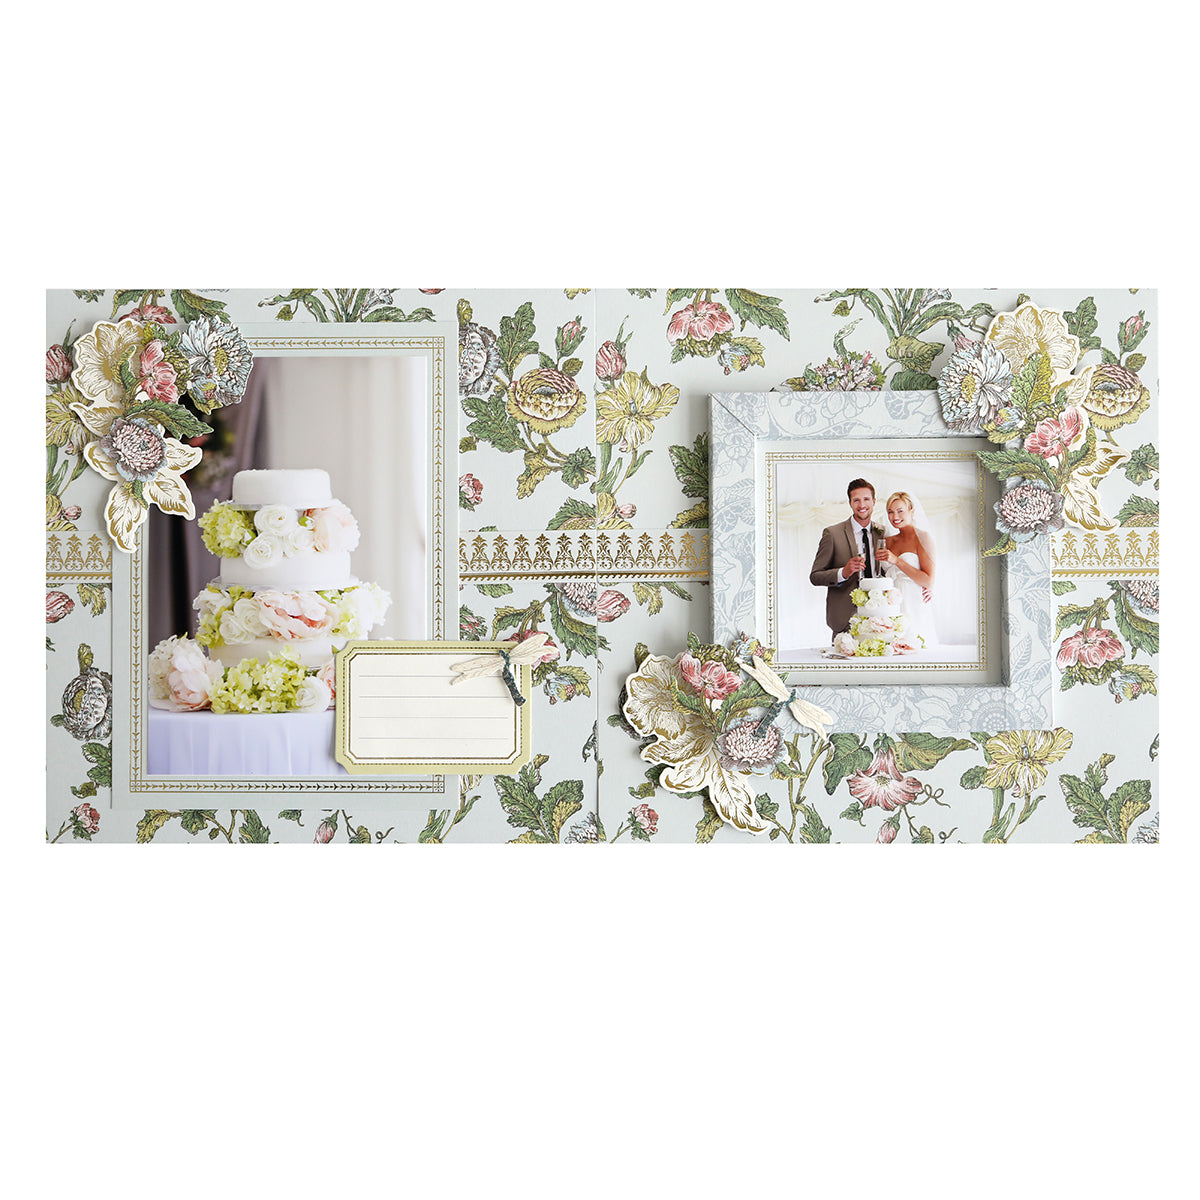 A collage-style Wildflower Meadow Mini Album wedding scrapbook page featuring floral patterns, a picture of a couple, embellishments like a wedding cake, frame cutouts, and journaling tags.